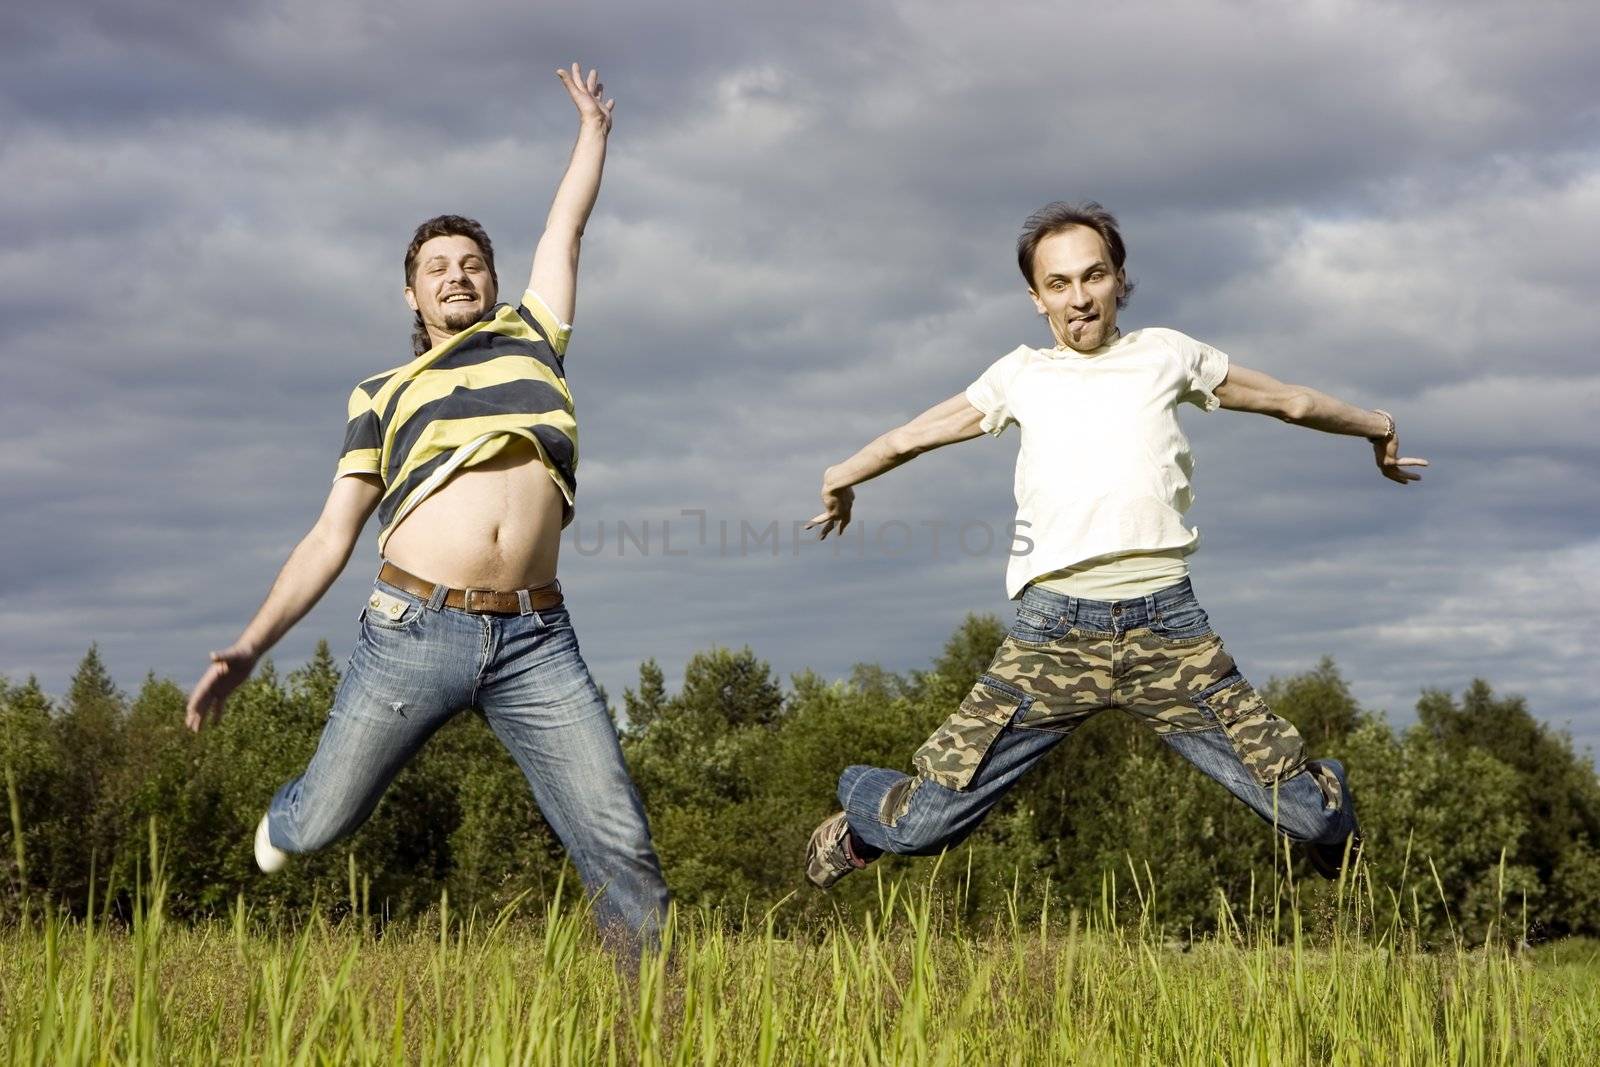 Two young men joyfully jump on a grass